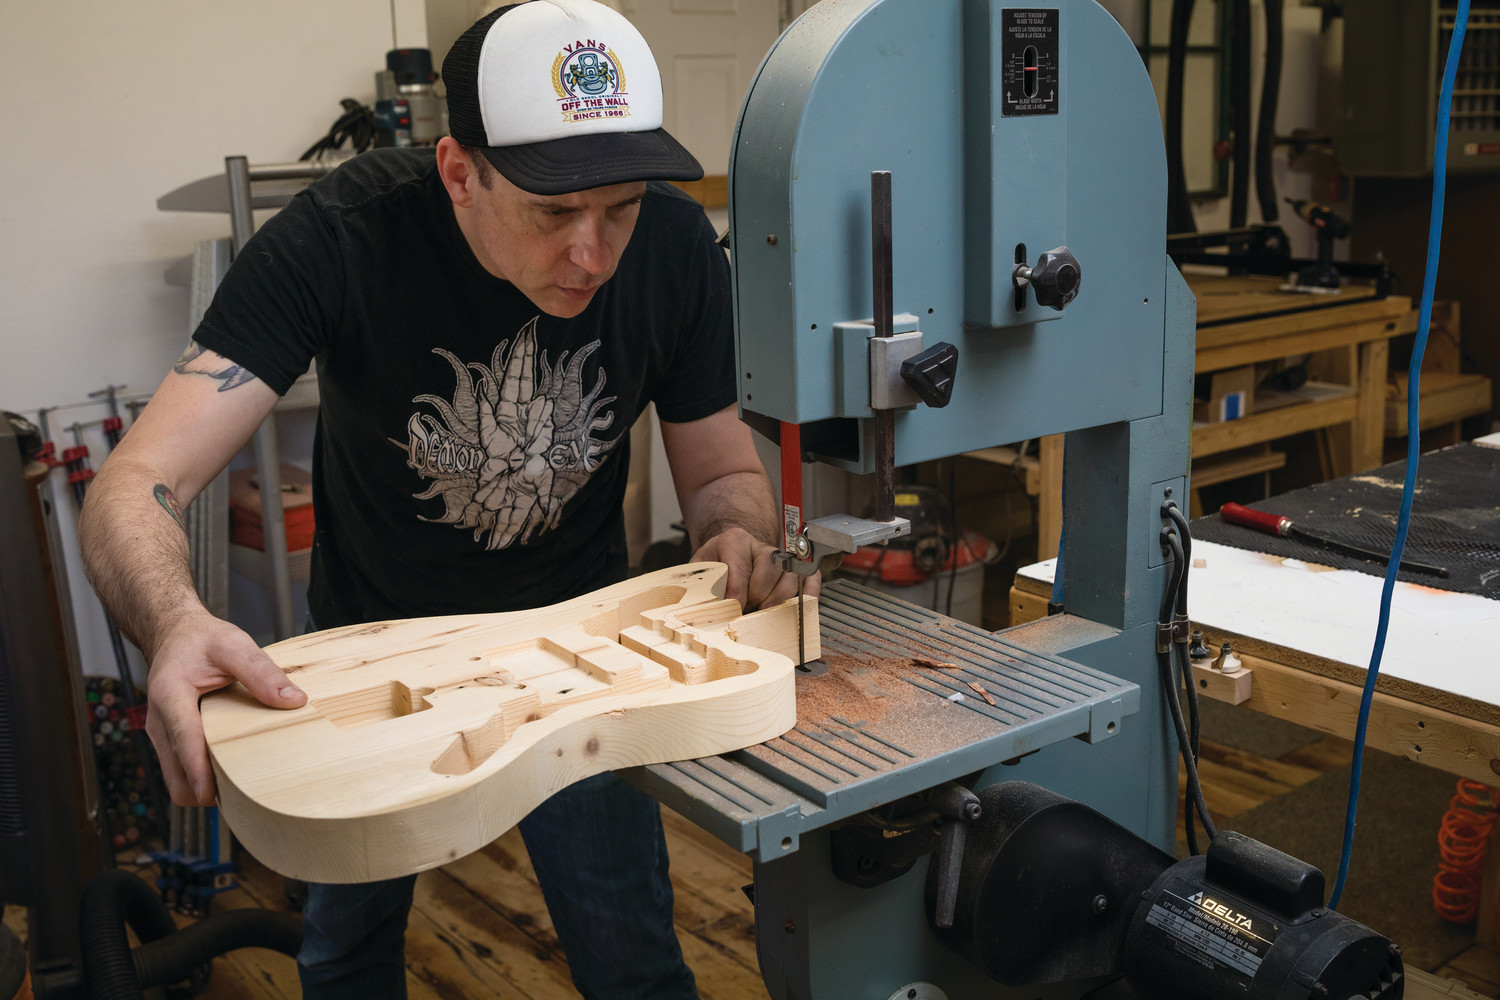 Bill Paukert, luthier and owner of Unified Guitar Works in Warren, creating a guitar from reclaimed wood.